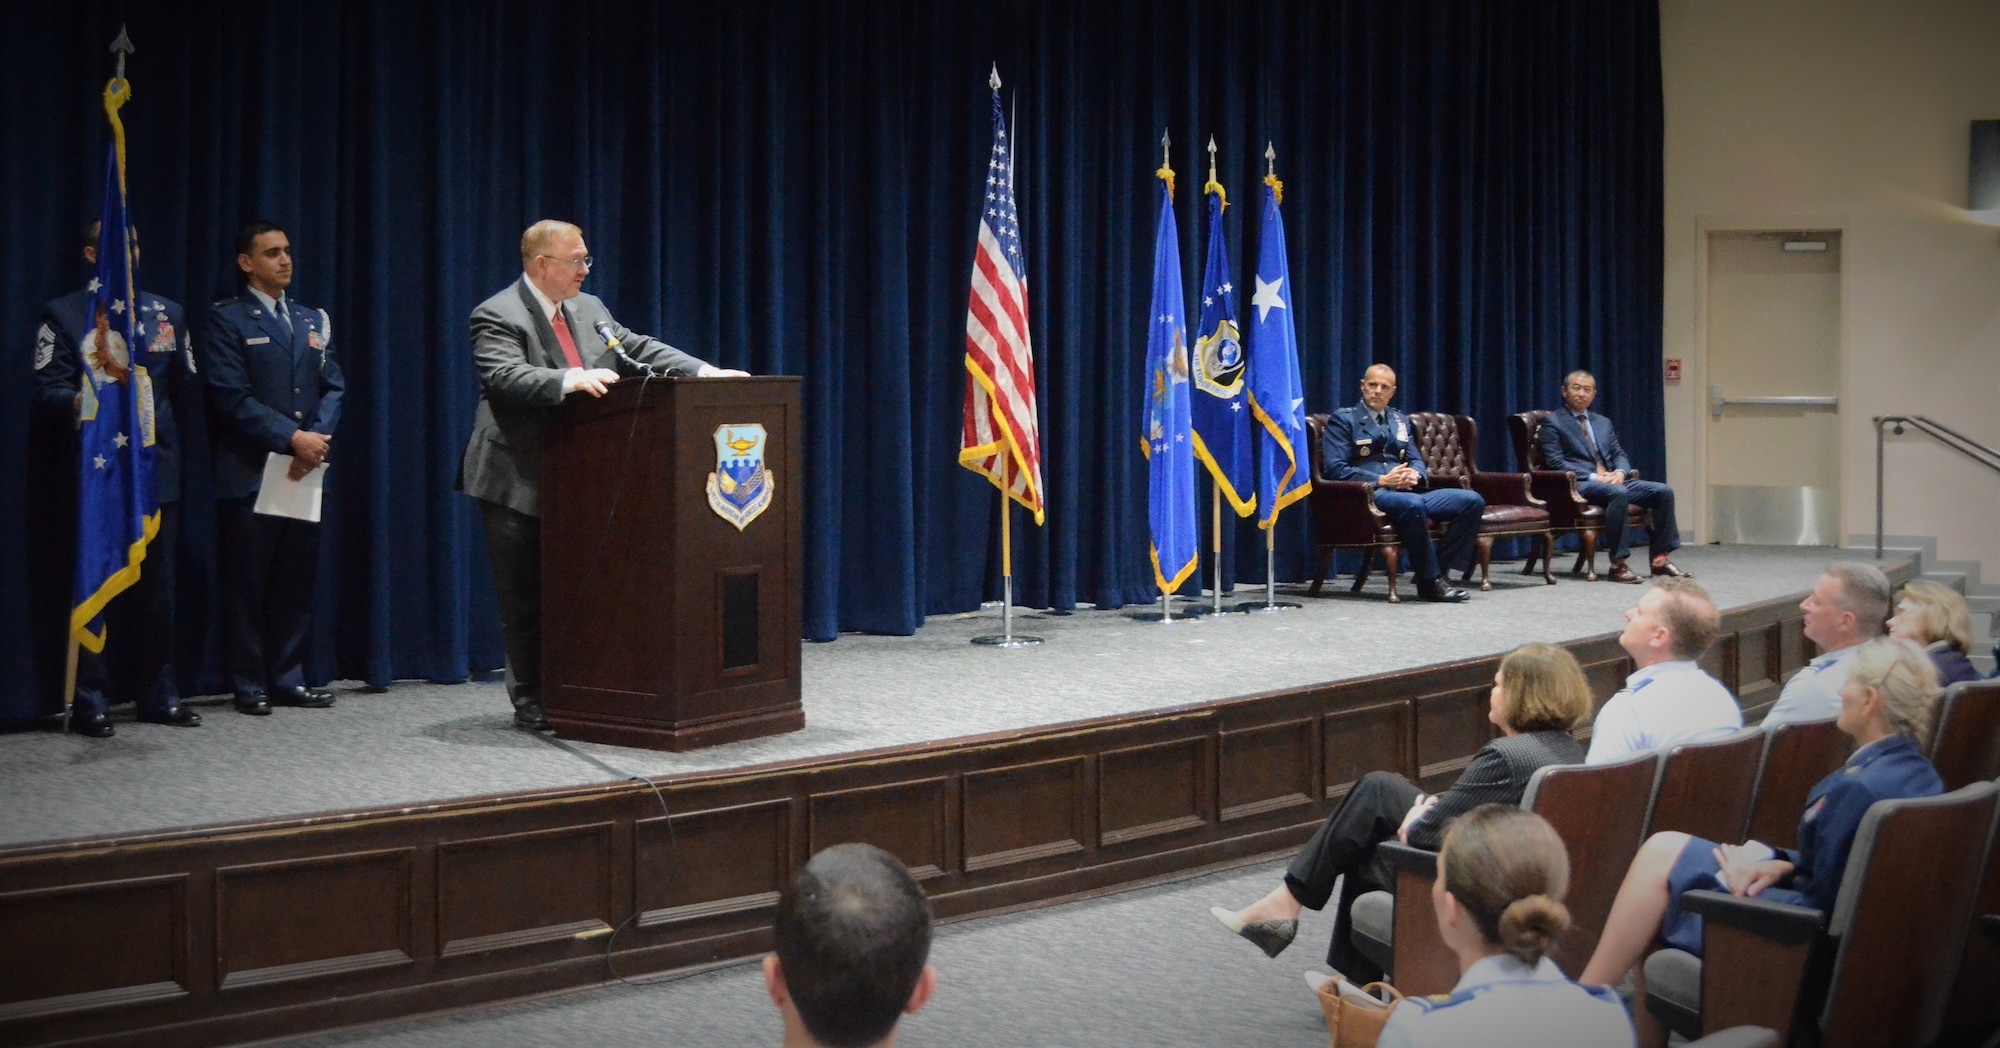 Terry Edwards addresses the audience after assuming leadership of the Air Force Civil Engineer Center during a ceremony at Lackland Air Force Base, Texas, Oct. 29, 2018.